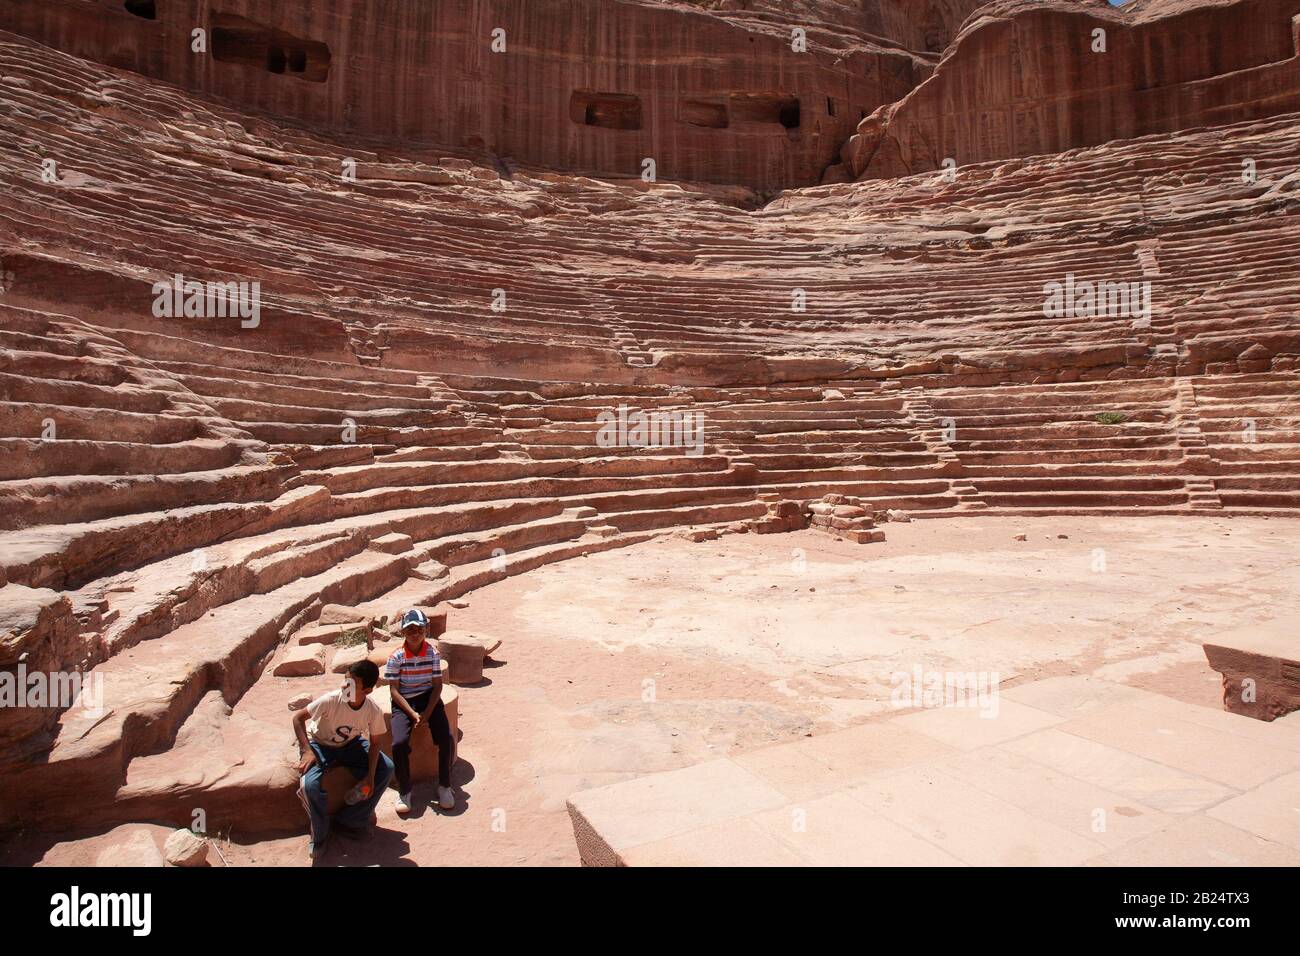 Petra, Jordan, April 30, 2009: A Nabataean theatre carved out of limestone rock of the ancient Nabataean city of Petra, Jordan. Stock Photo